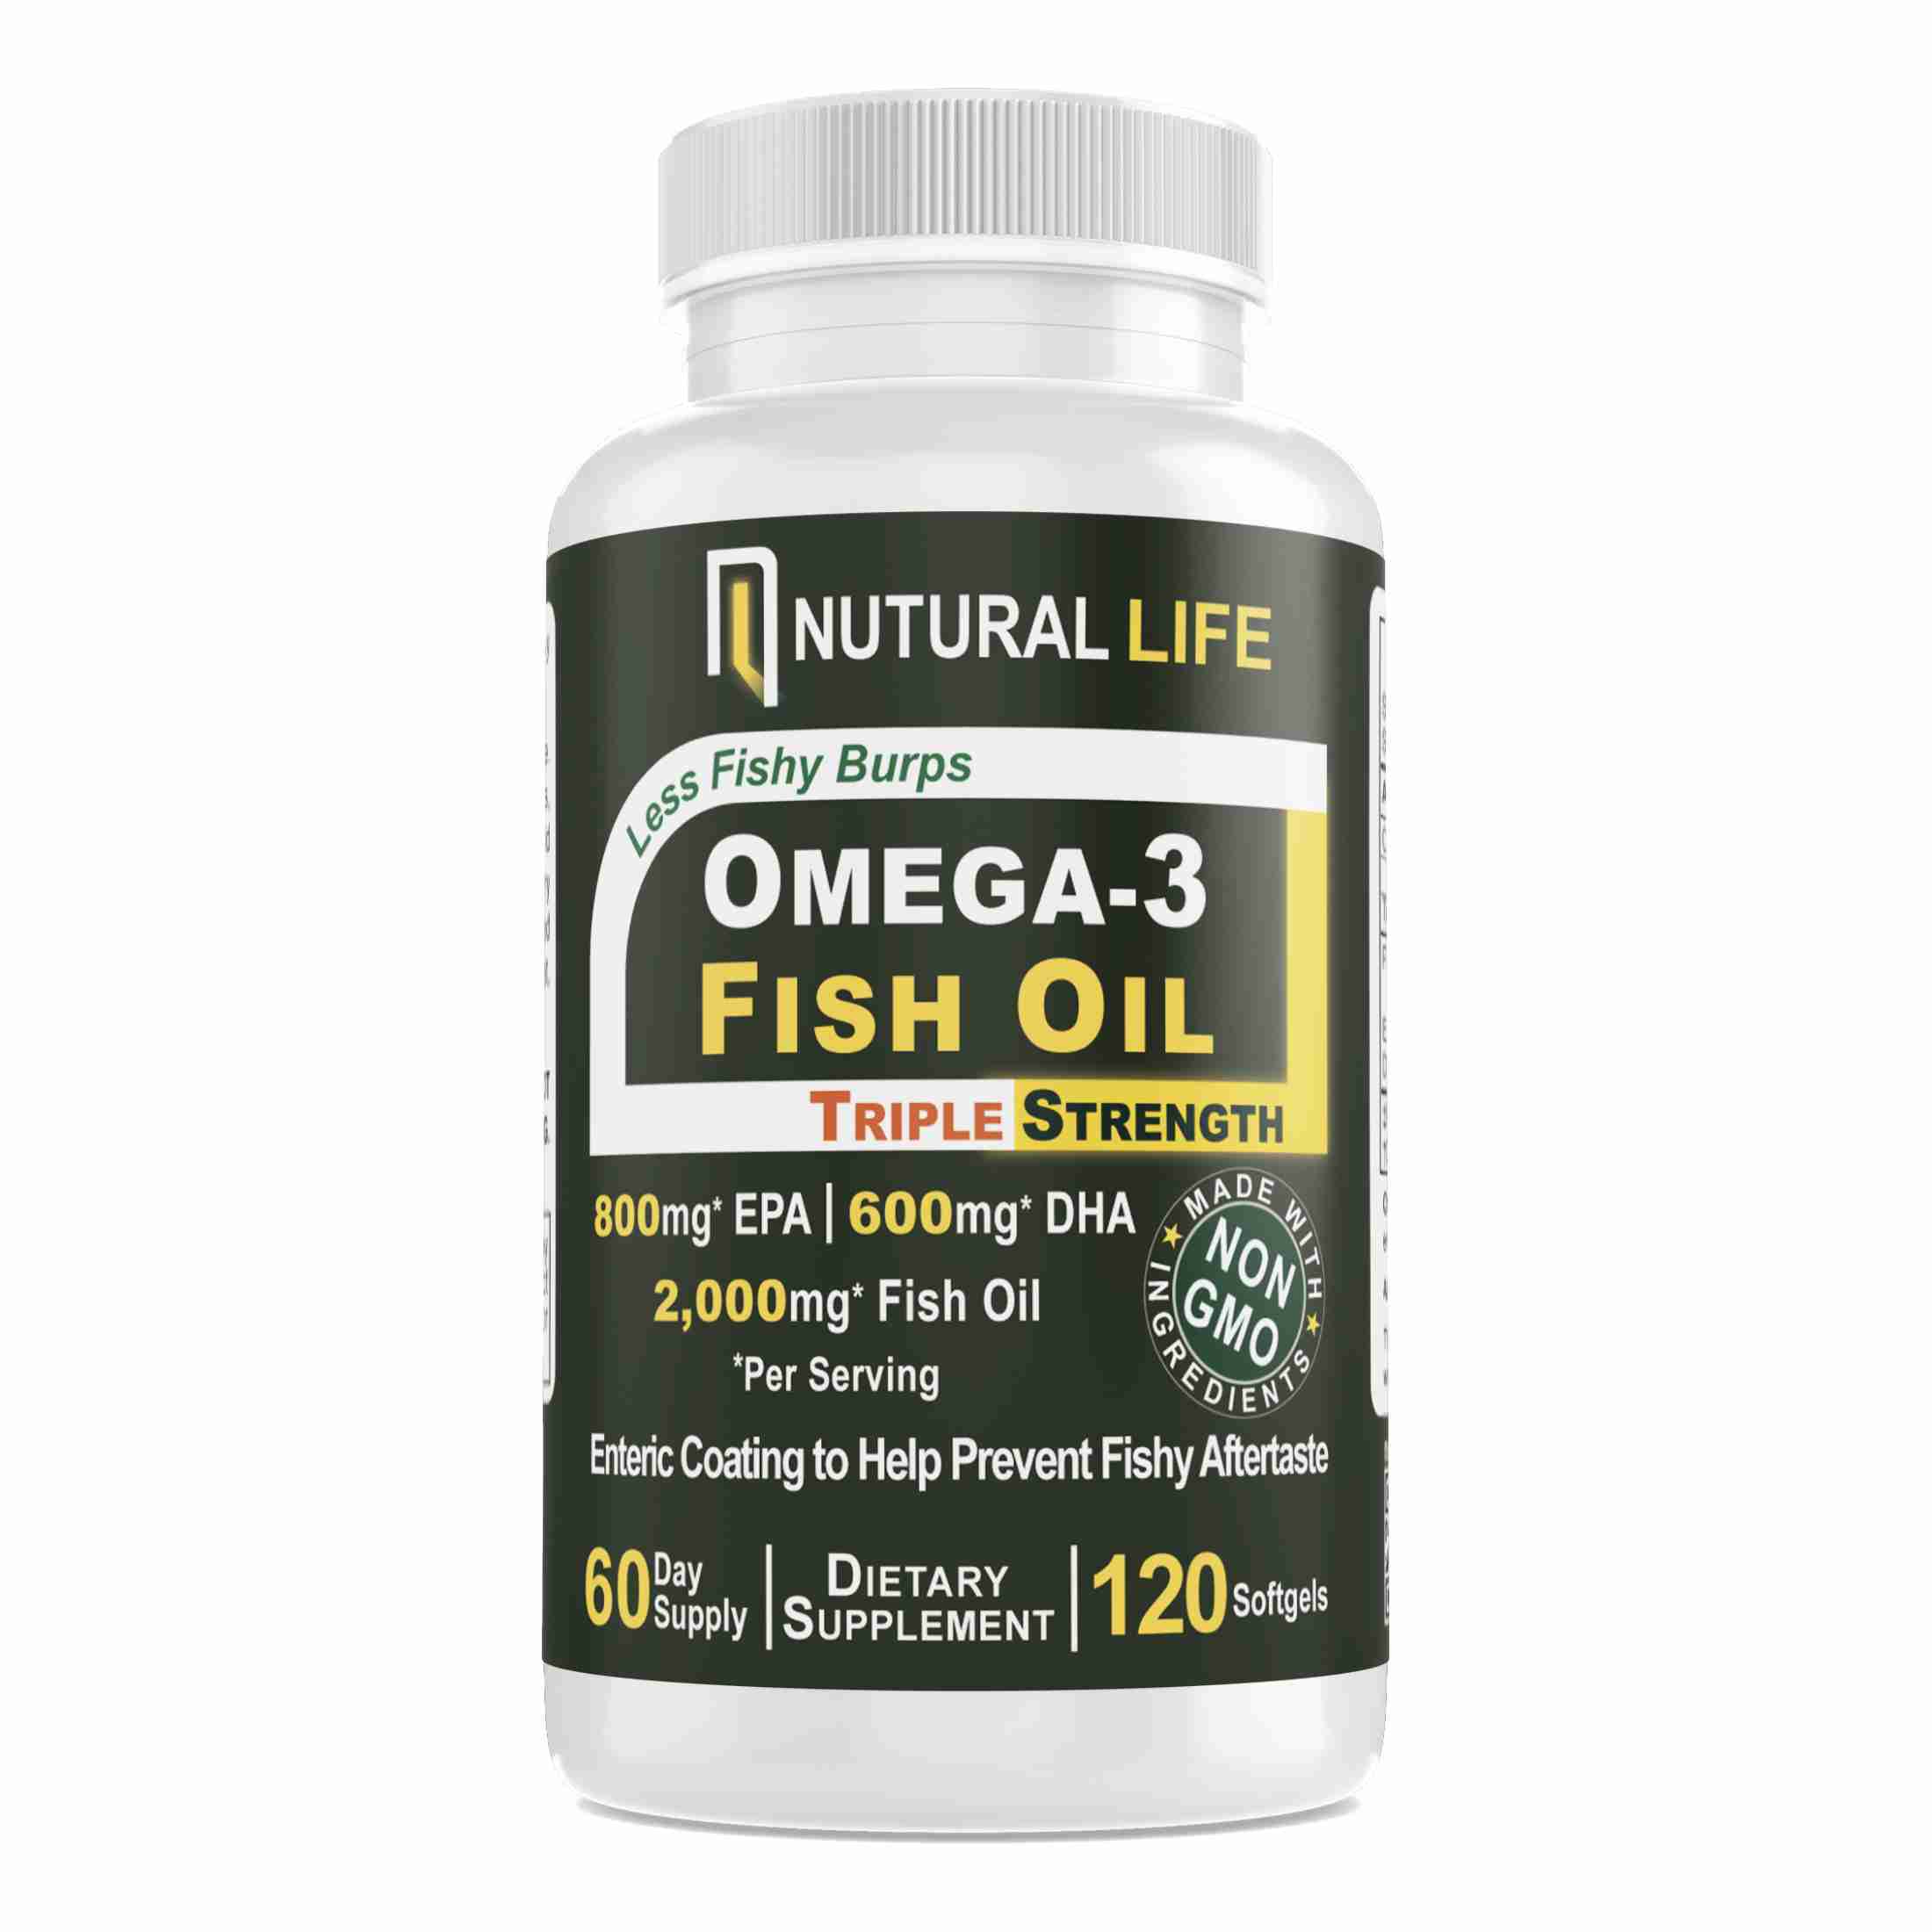 image-3-fish-oil-supplement with cash back rebate